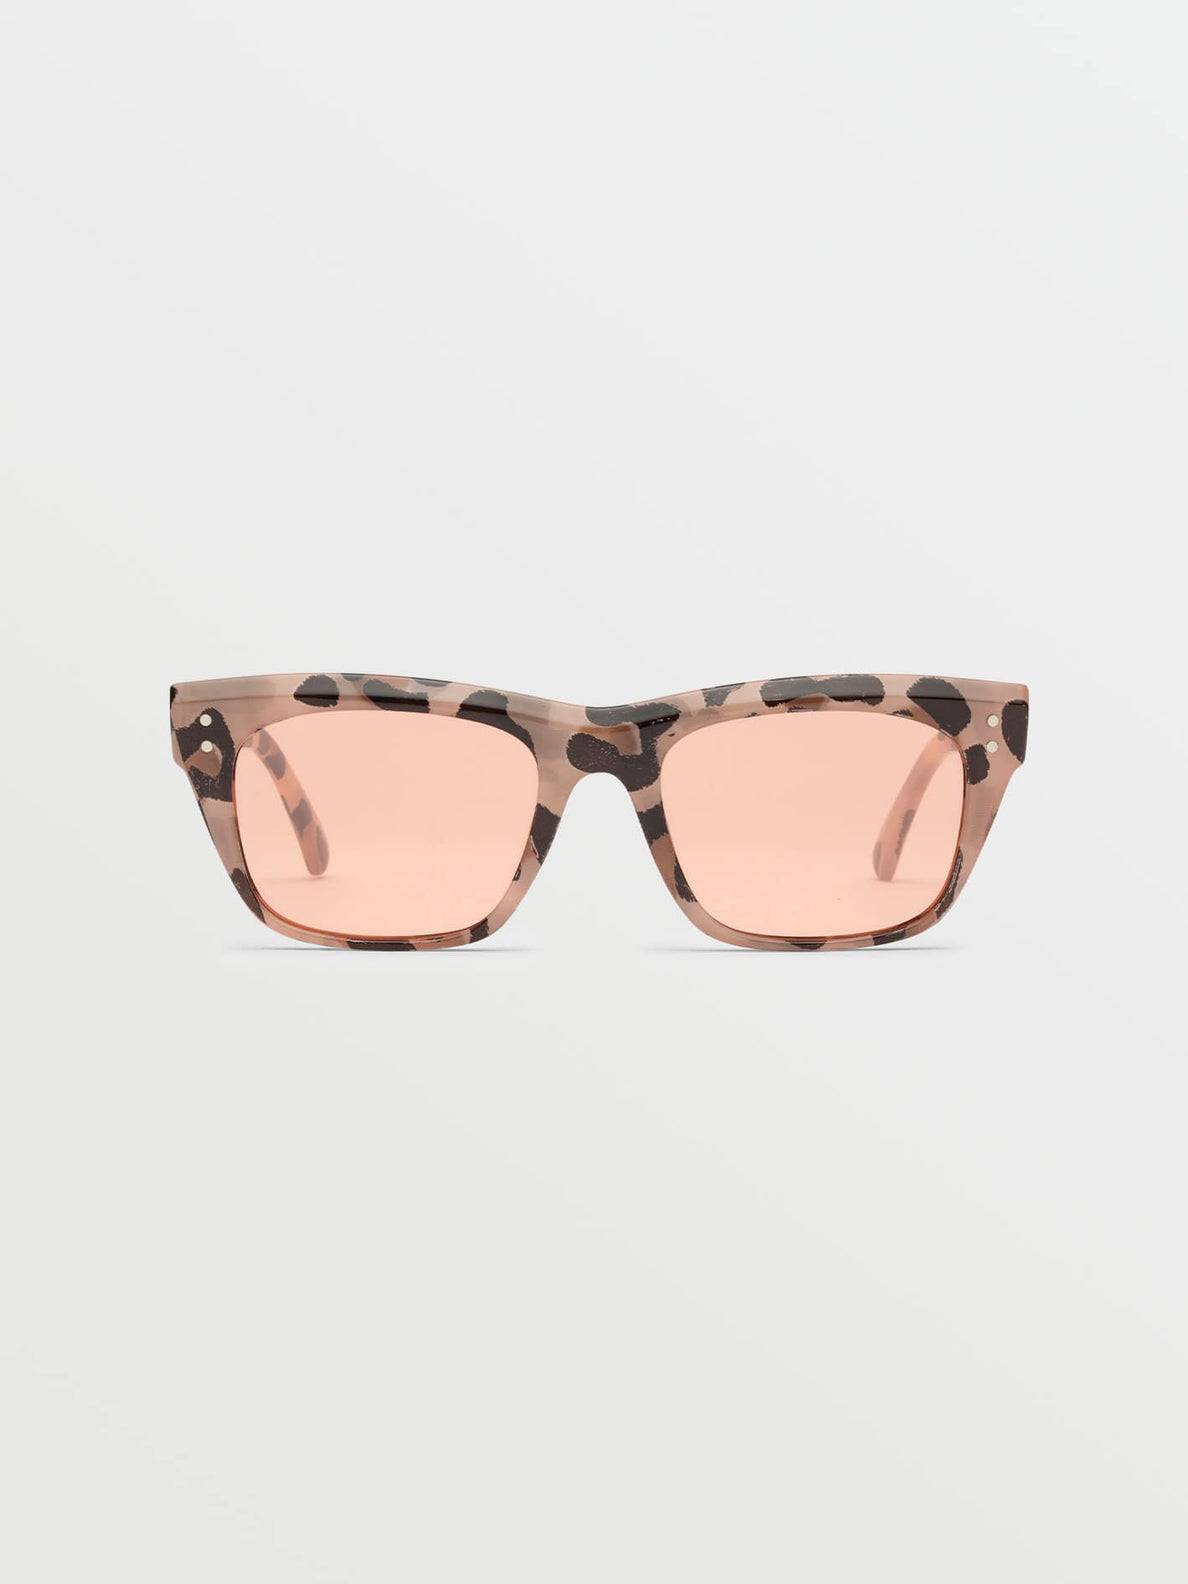 STONEVIEW SUNGLASSES - DEFF LEOPARD/ROSE